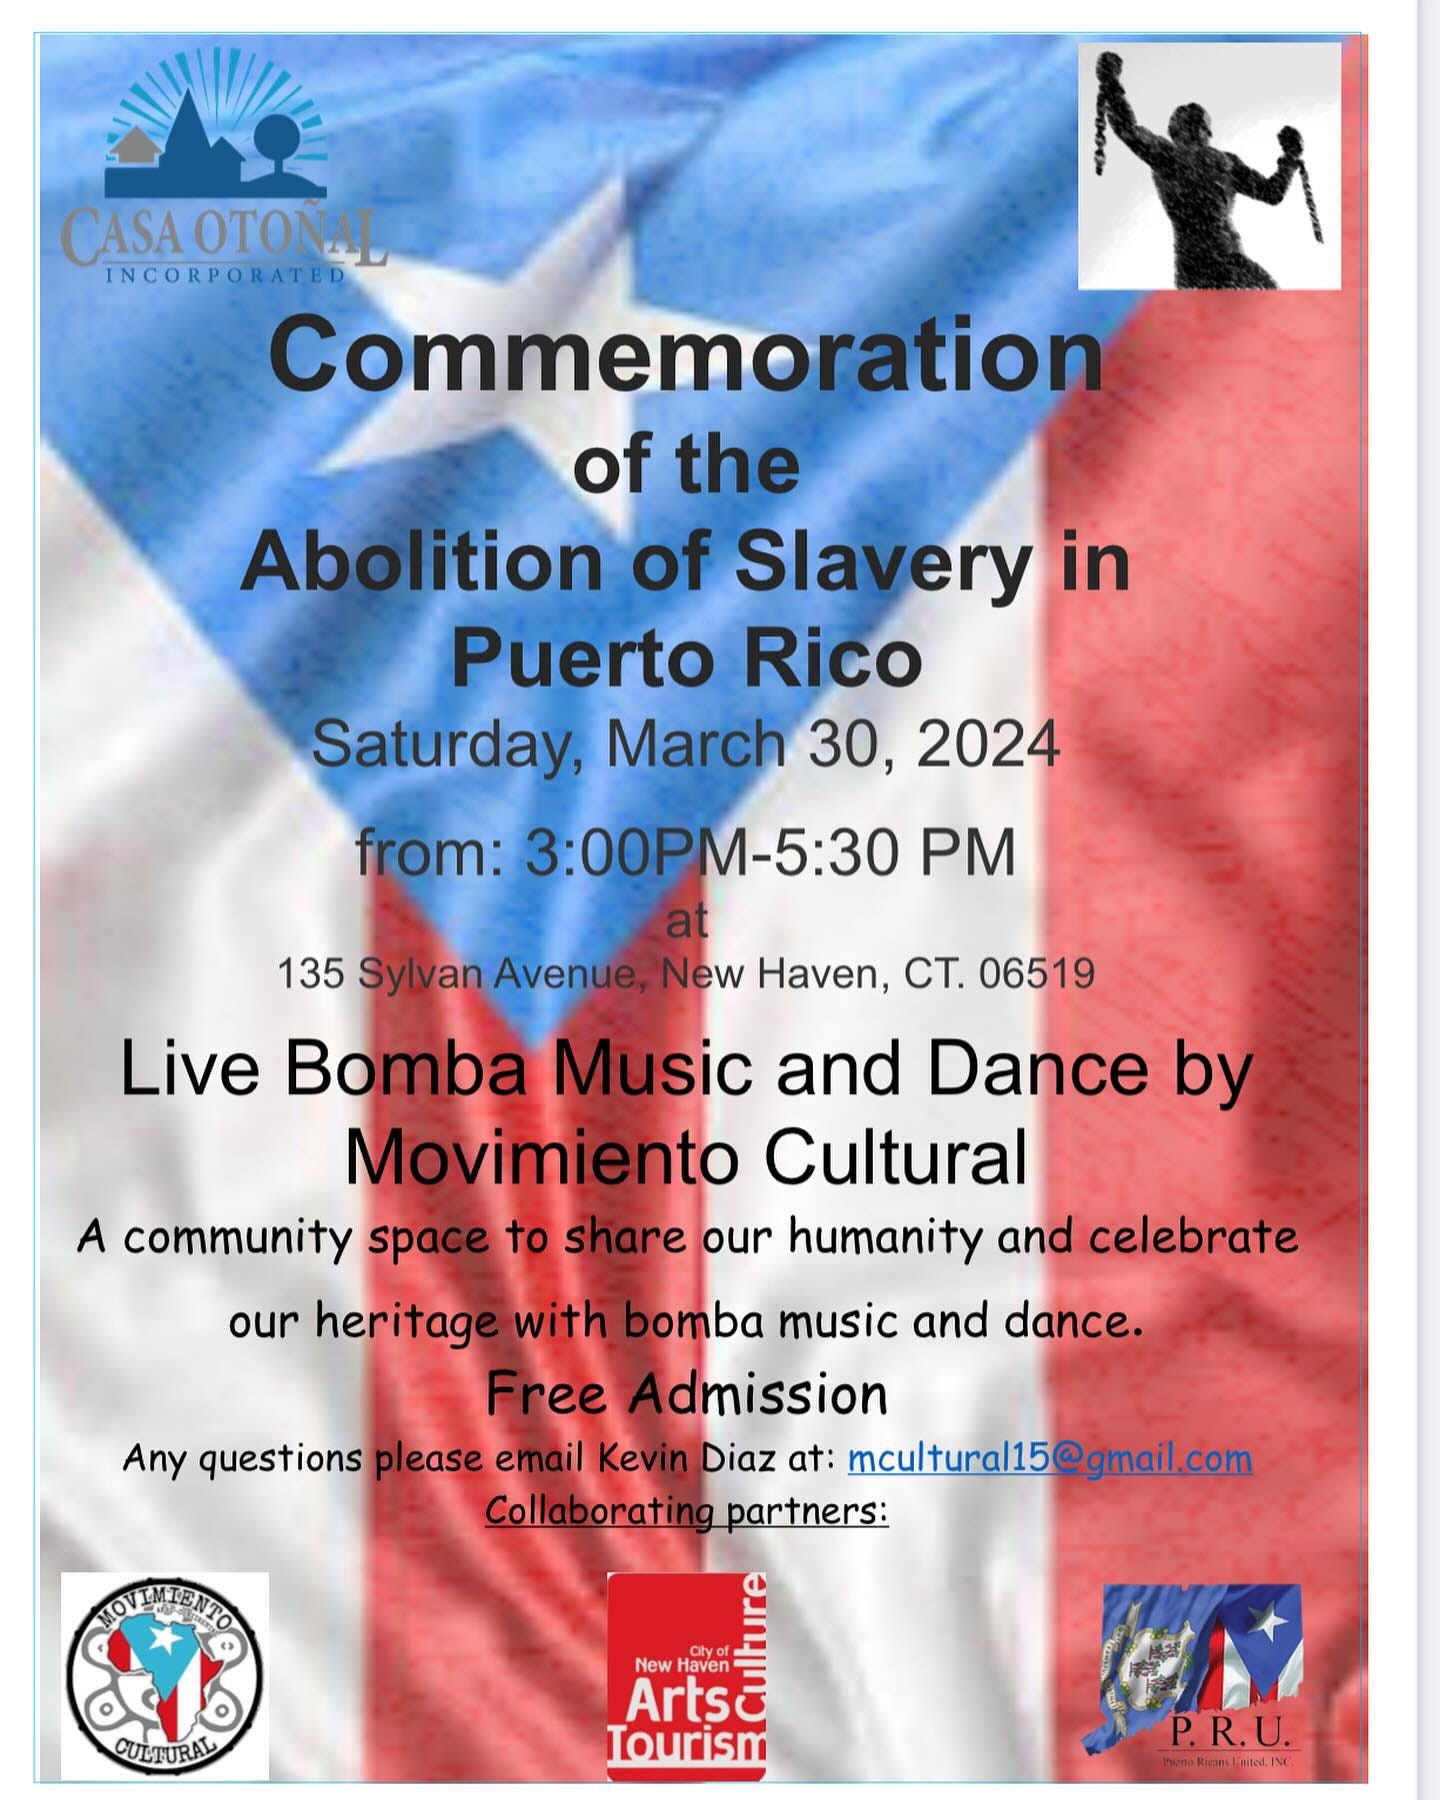 May be an image of text that says 'CASAOTONAL INCORPORATED Commemoration of the Abolition of Slavery in Puerto Rico Saturday, March 30, 2024 from: 3:00PM-5:30 PM 135 Sylvan Avenue, New Haven, CT. 06519 Live Bomba Music and Dance by Movimiento Cultural A community space to share our humanity and celebrate our heritage with bomba music and dance. Free Adn Any questions please email Kevin Diaz at: mcultural15 Collaborating HOVINTENTON CULTURAL Haven + Arts Iourism P.R.U. hemo-Rianstnted.INC'